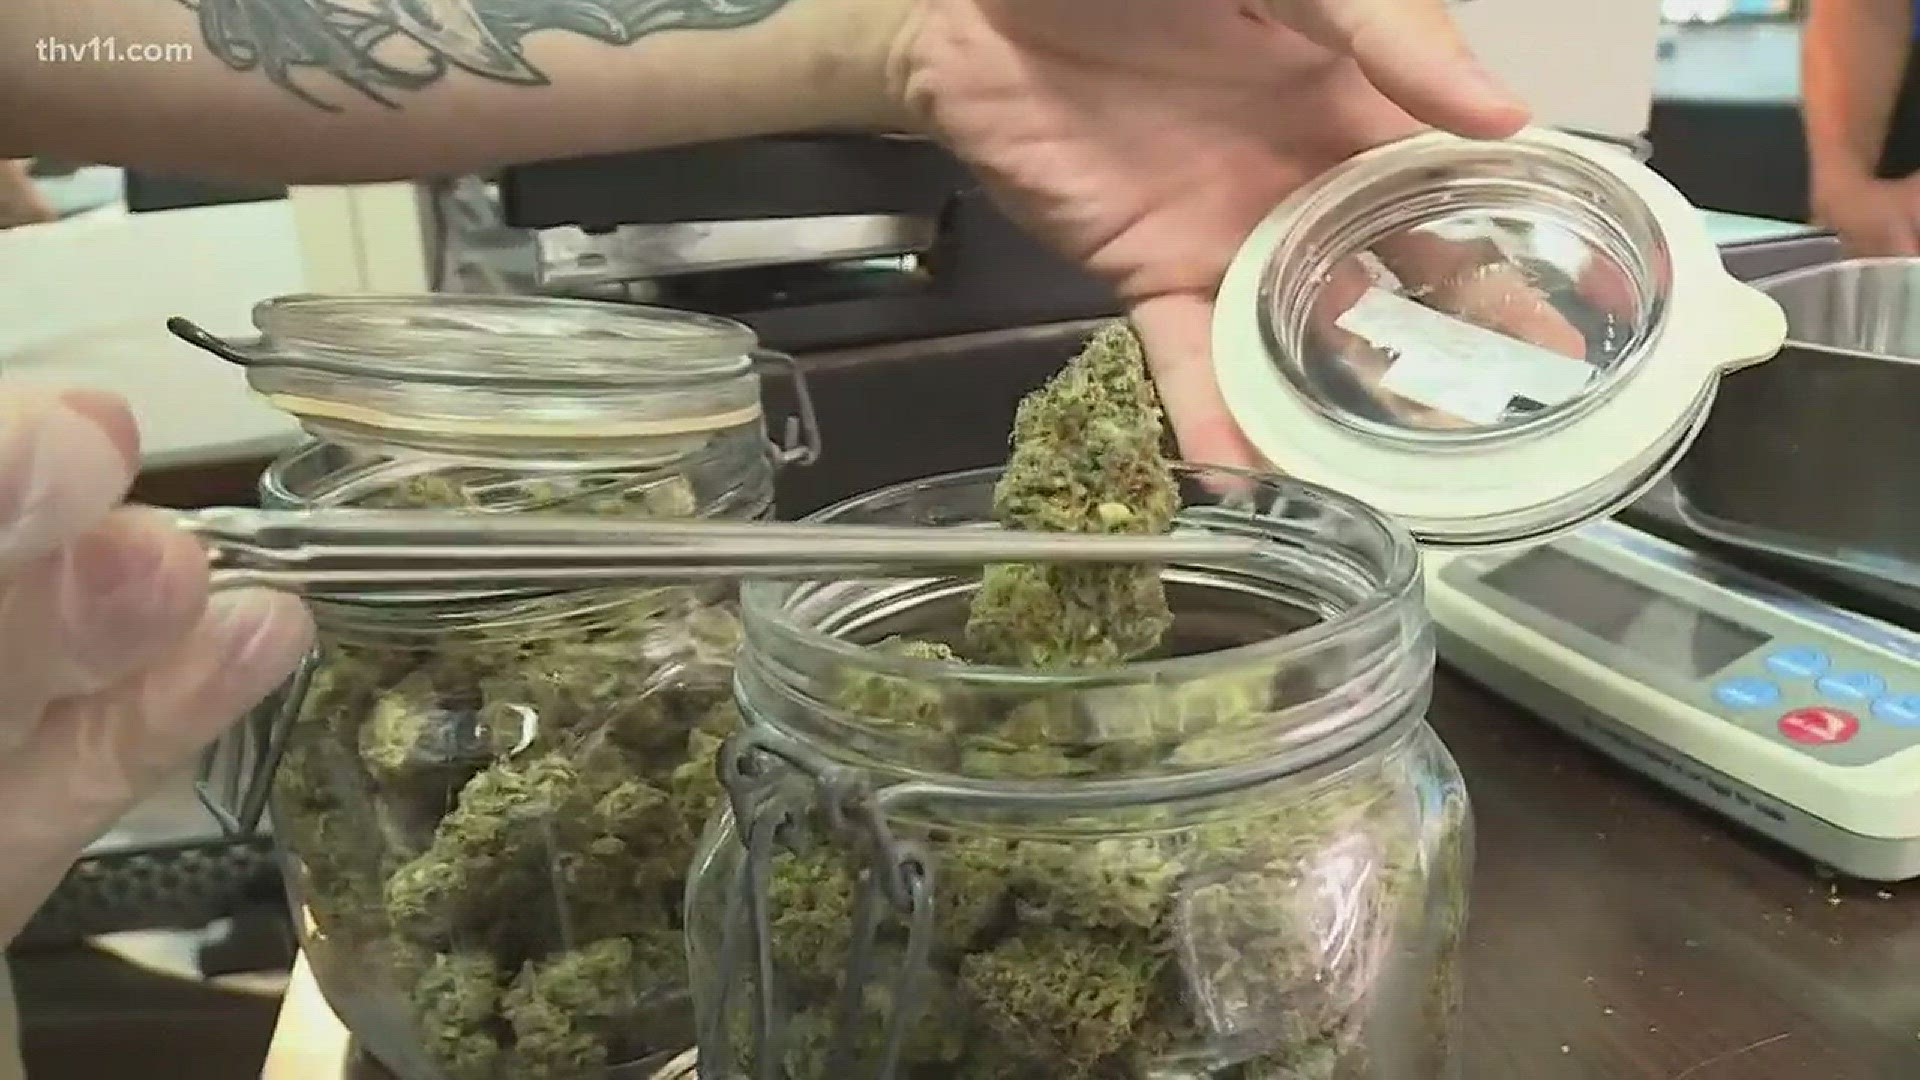 Major movement in Arkansas medical marijuana industry. An agreement will be finalized very soon to score dispensary applications putting Arkansans a big step closer to seeing pot on the shelves.